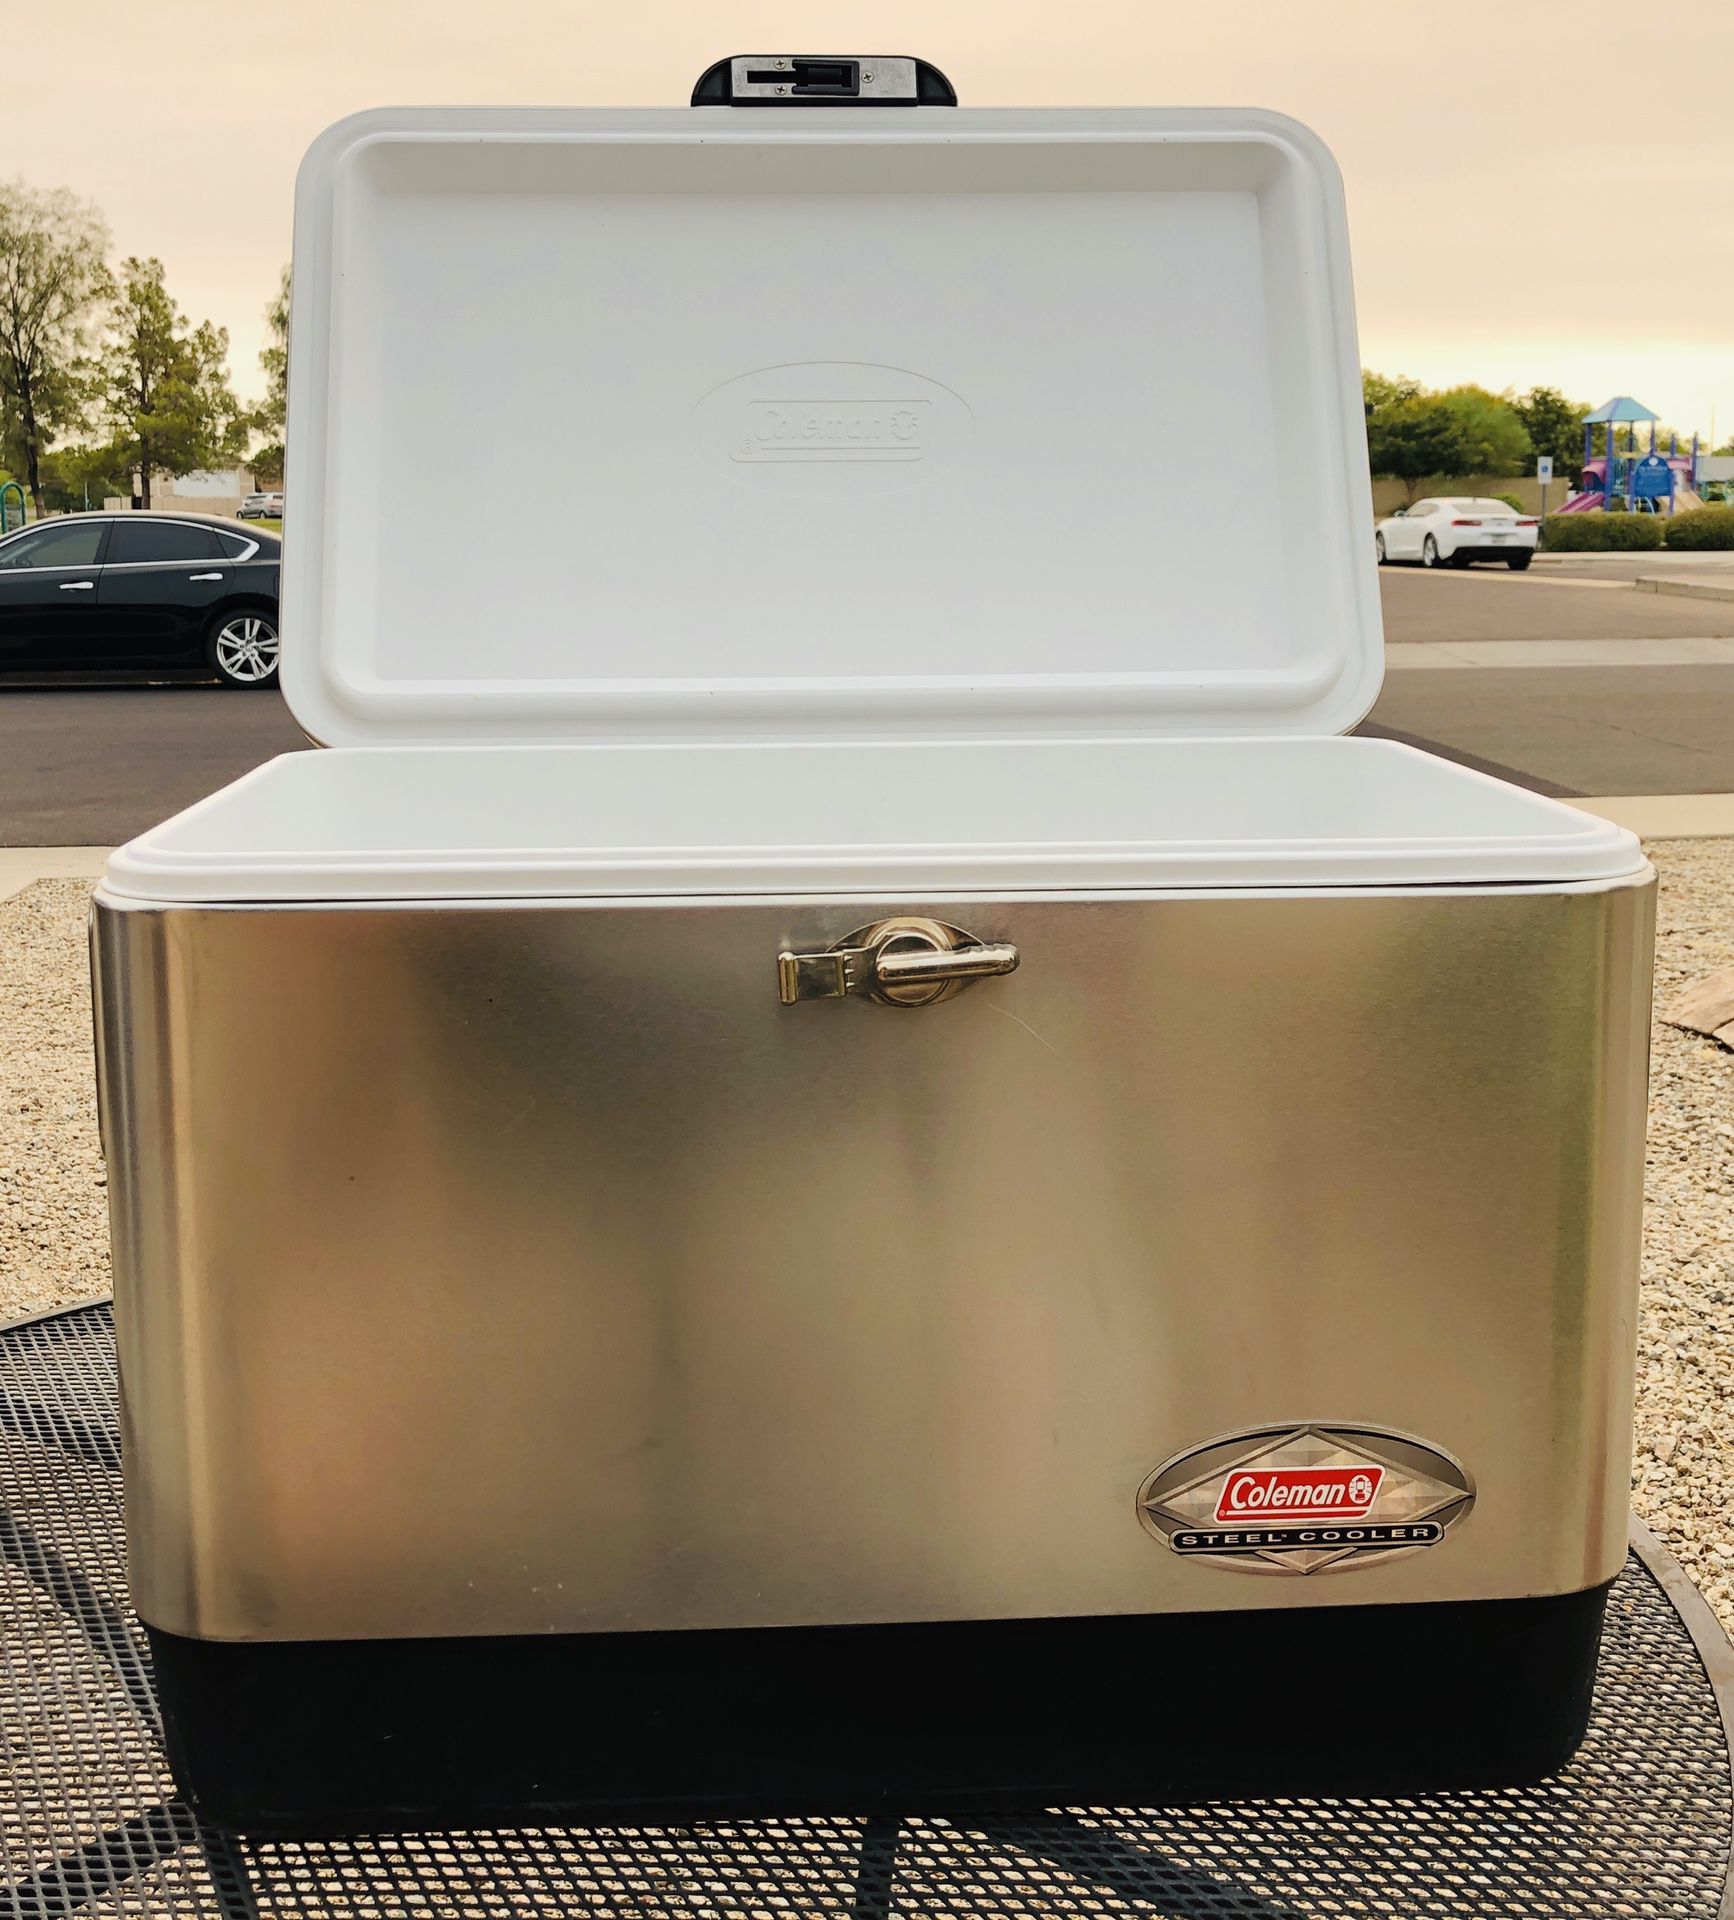 Coleman 100 year anniversary stainless steel cooler excellent condition Bell road and 35th Ave.